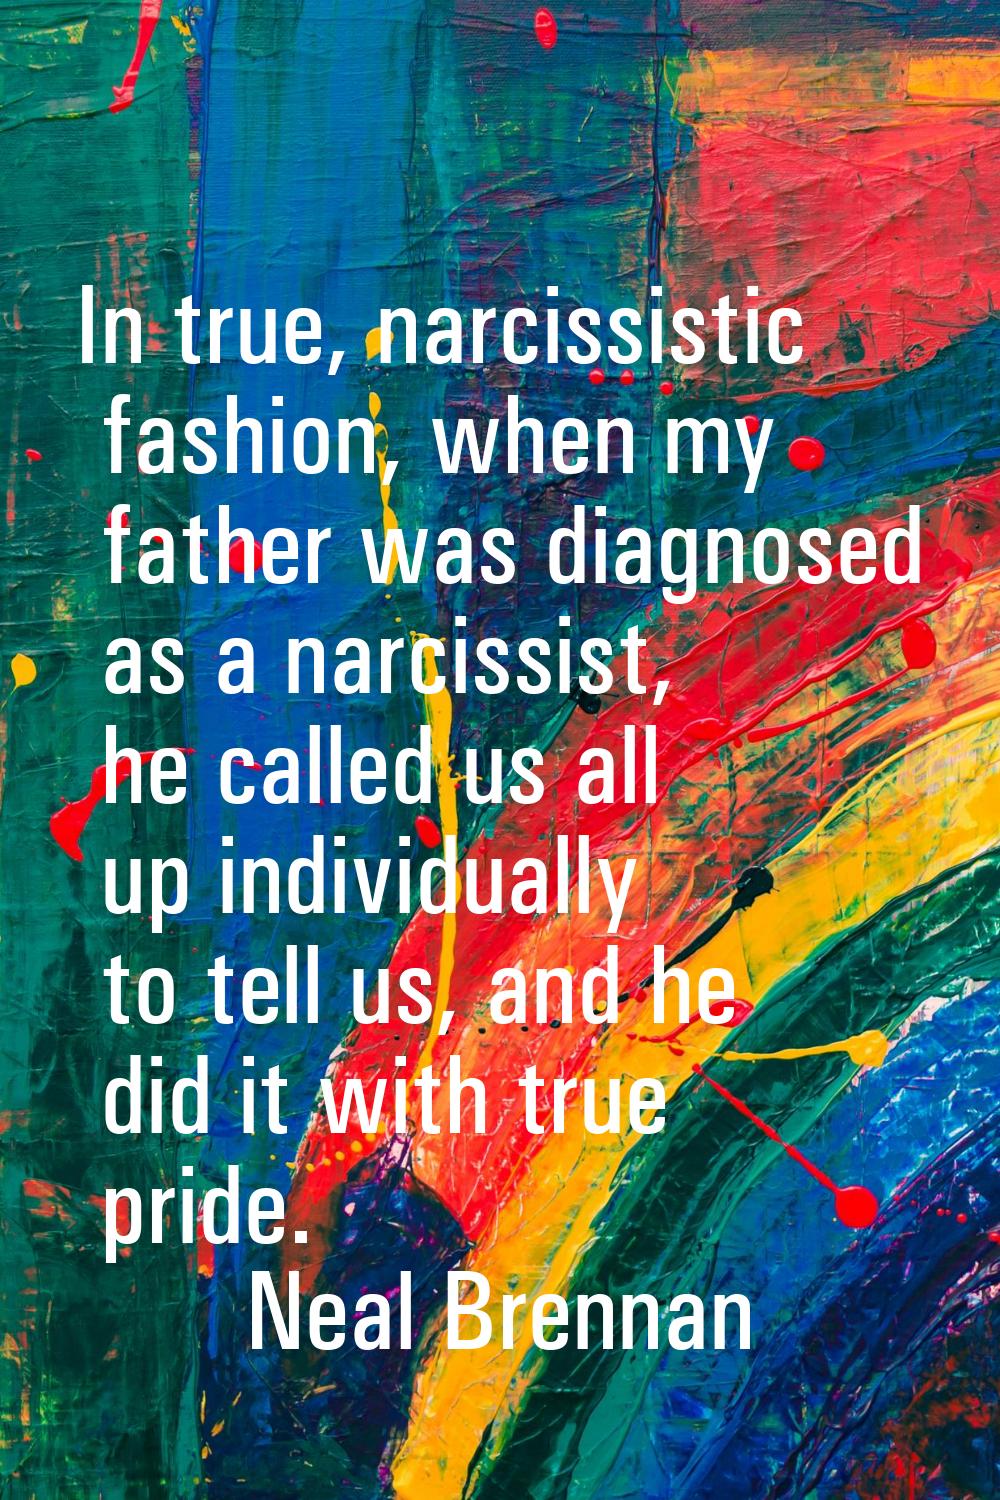 In true, narcissistic fashion, when my father was diagnosed as a narcissist, he called us all up in